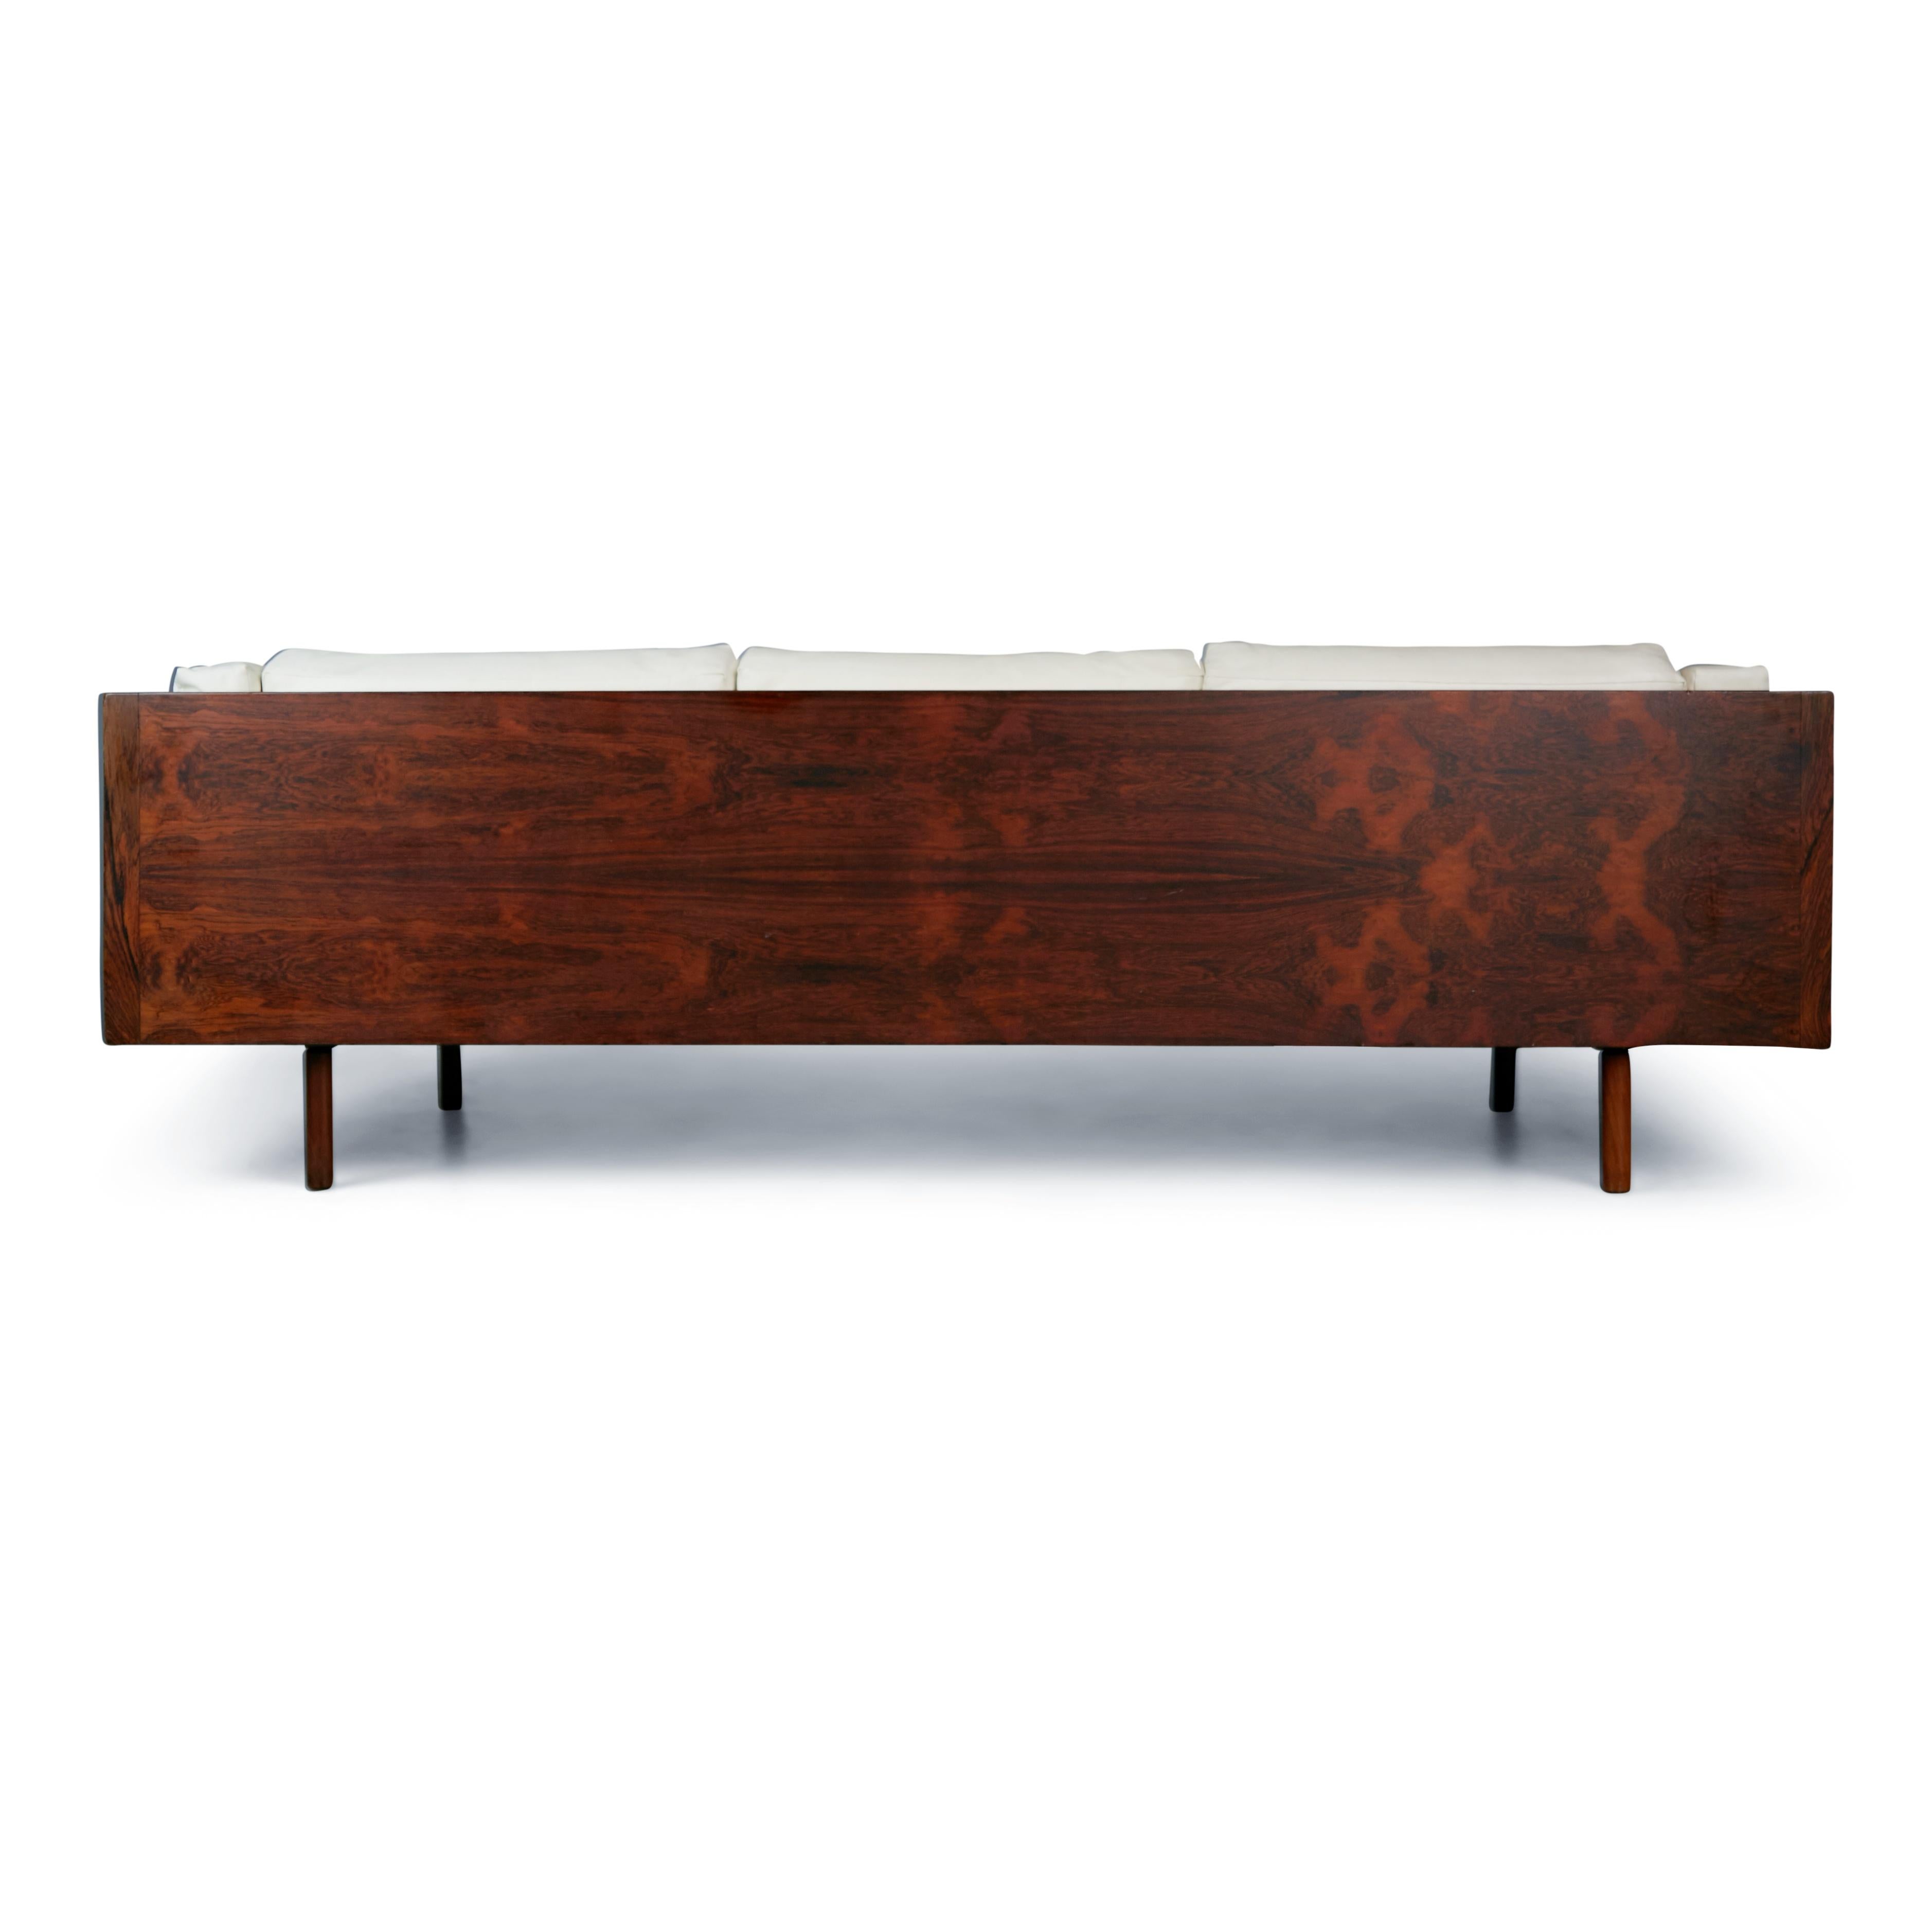 American Rosewood and Leather Case Sofa by Milo Baughman for Thayer Coggin, circa 1960